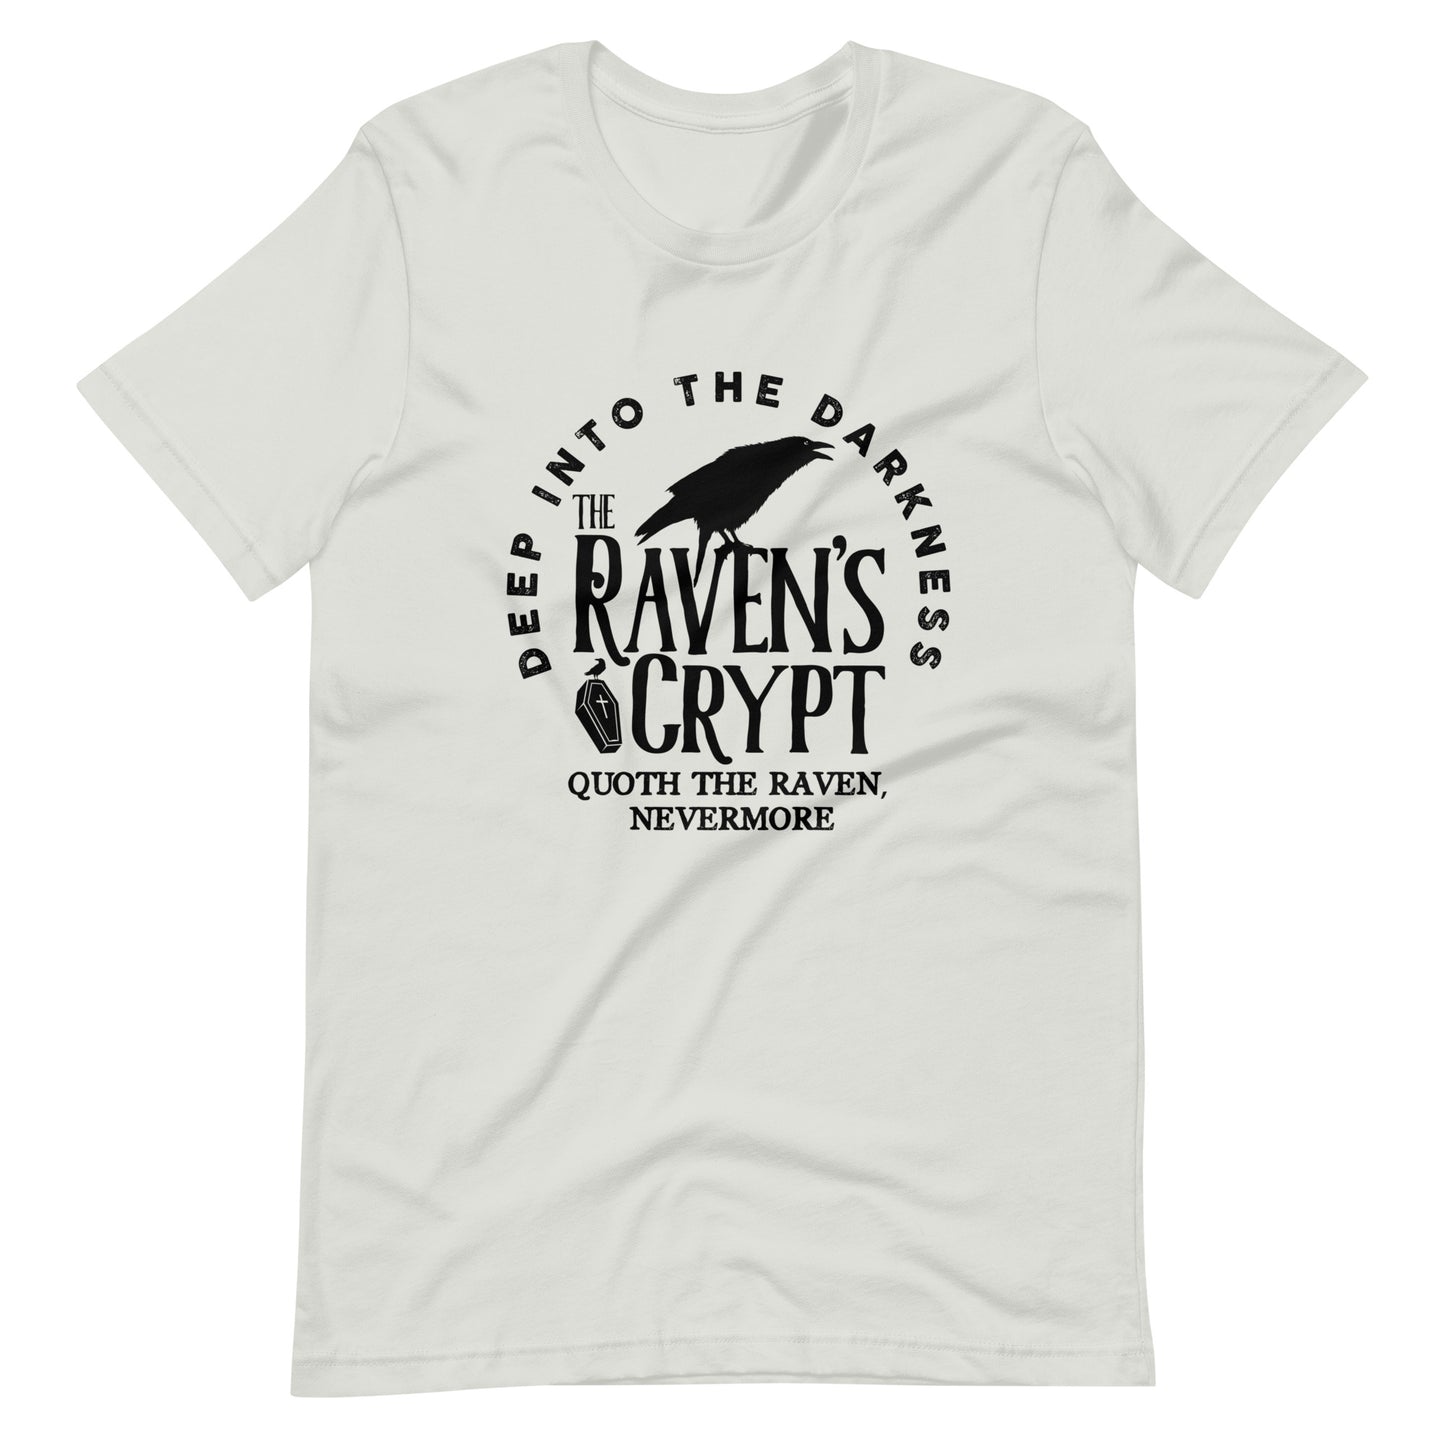 Deep Into the Darkness The Raven's Crypt - Men's t-shirt - Silver Front